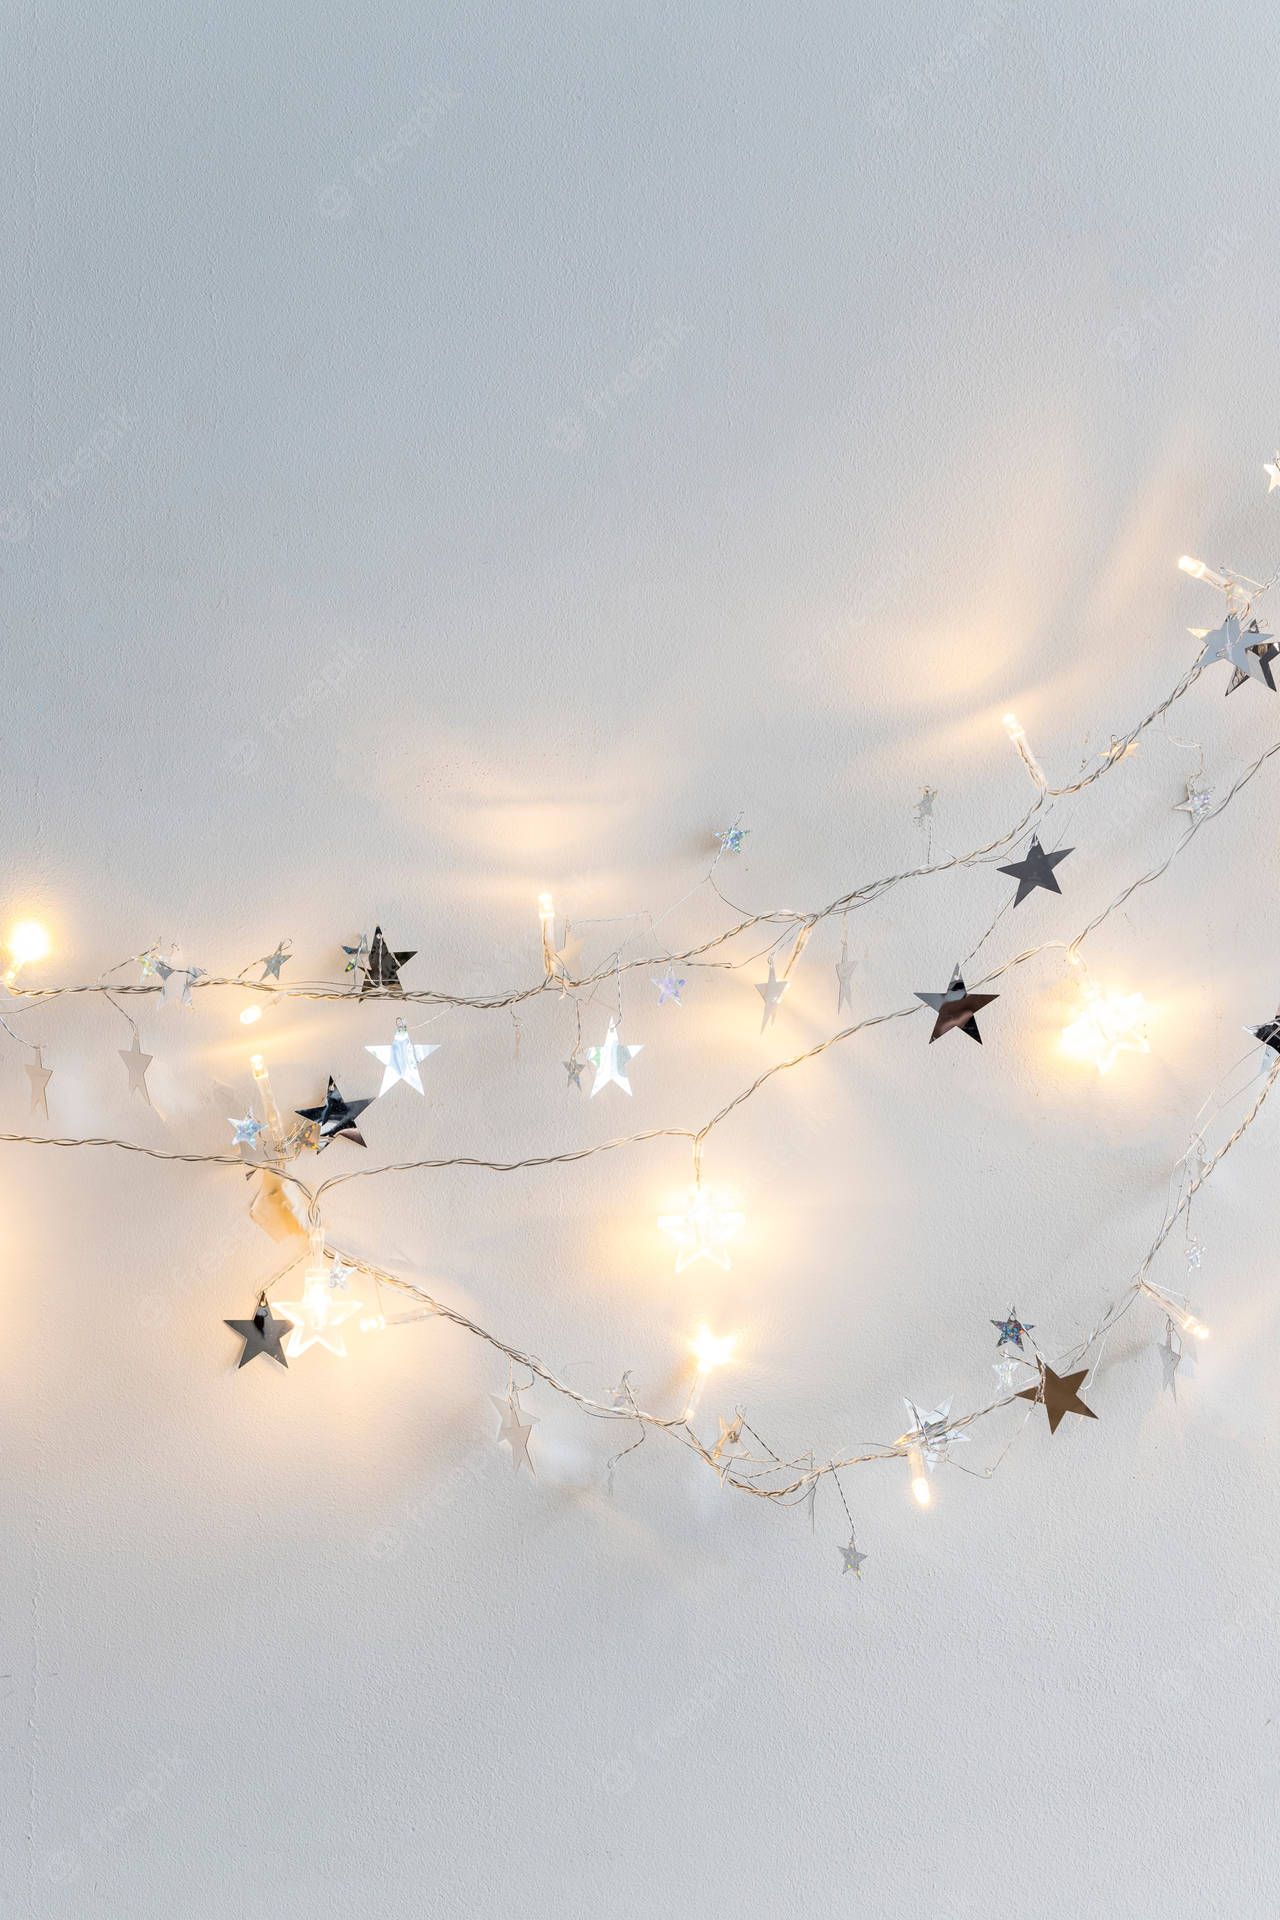 Illuminate your walls and get aesthetic lighting with fairy lights Wallpaper